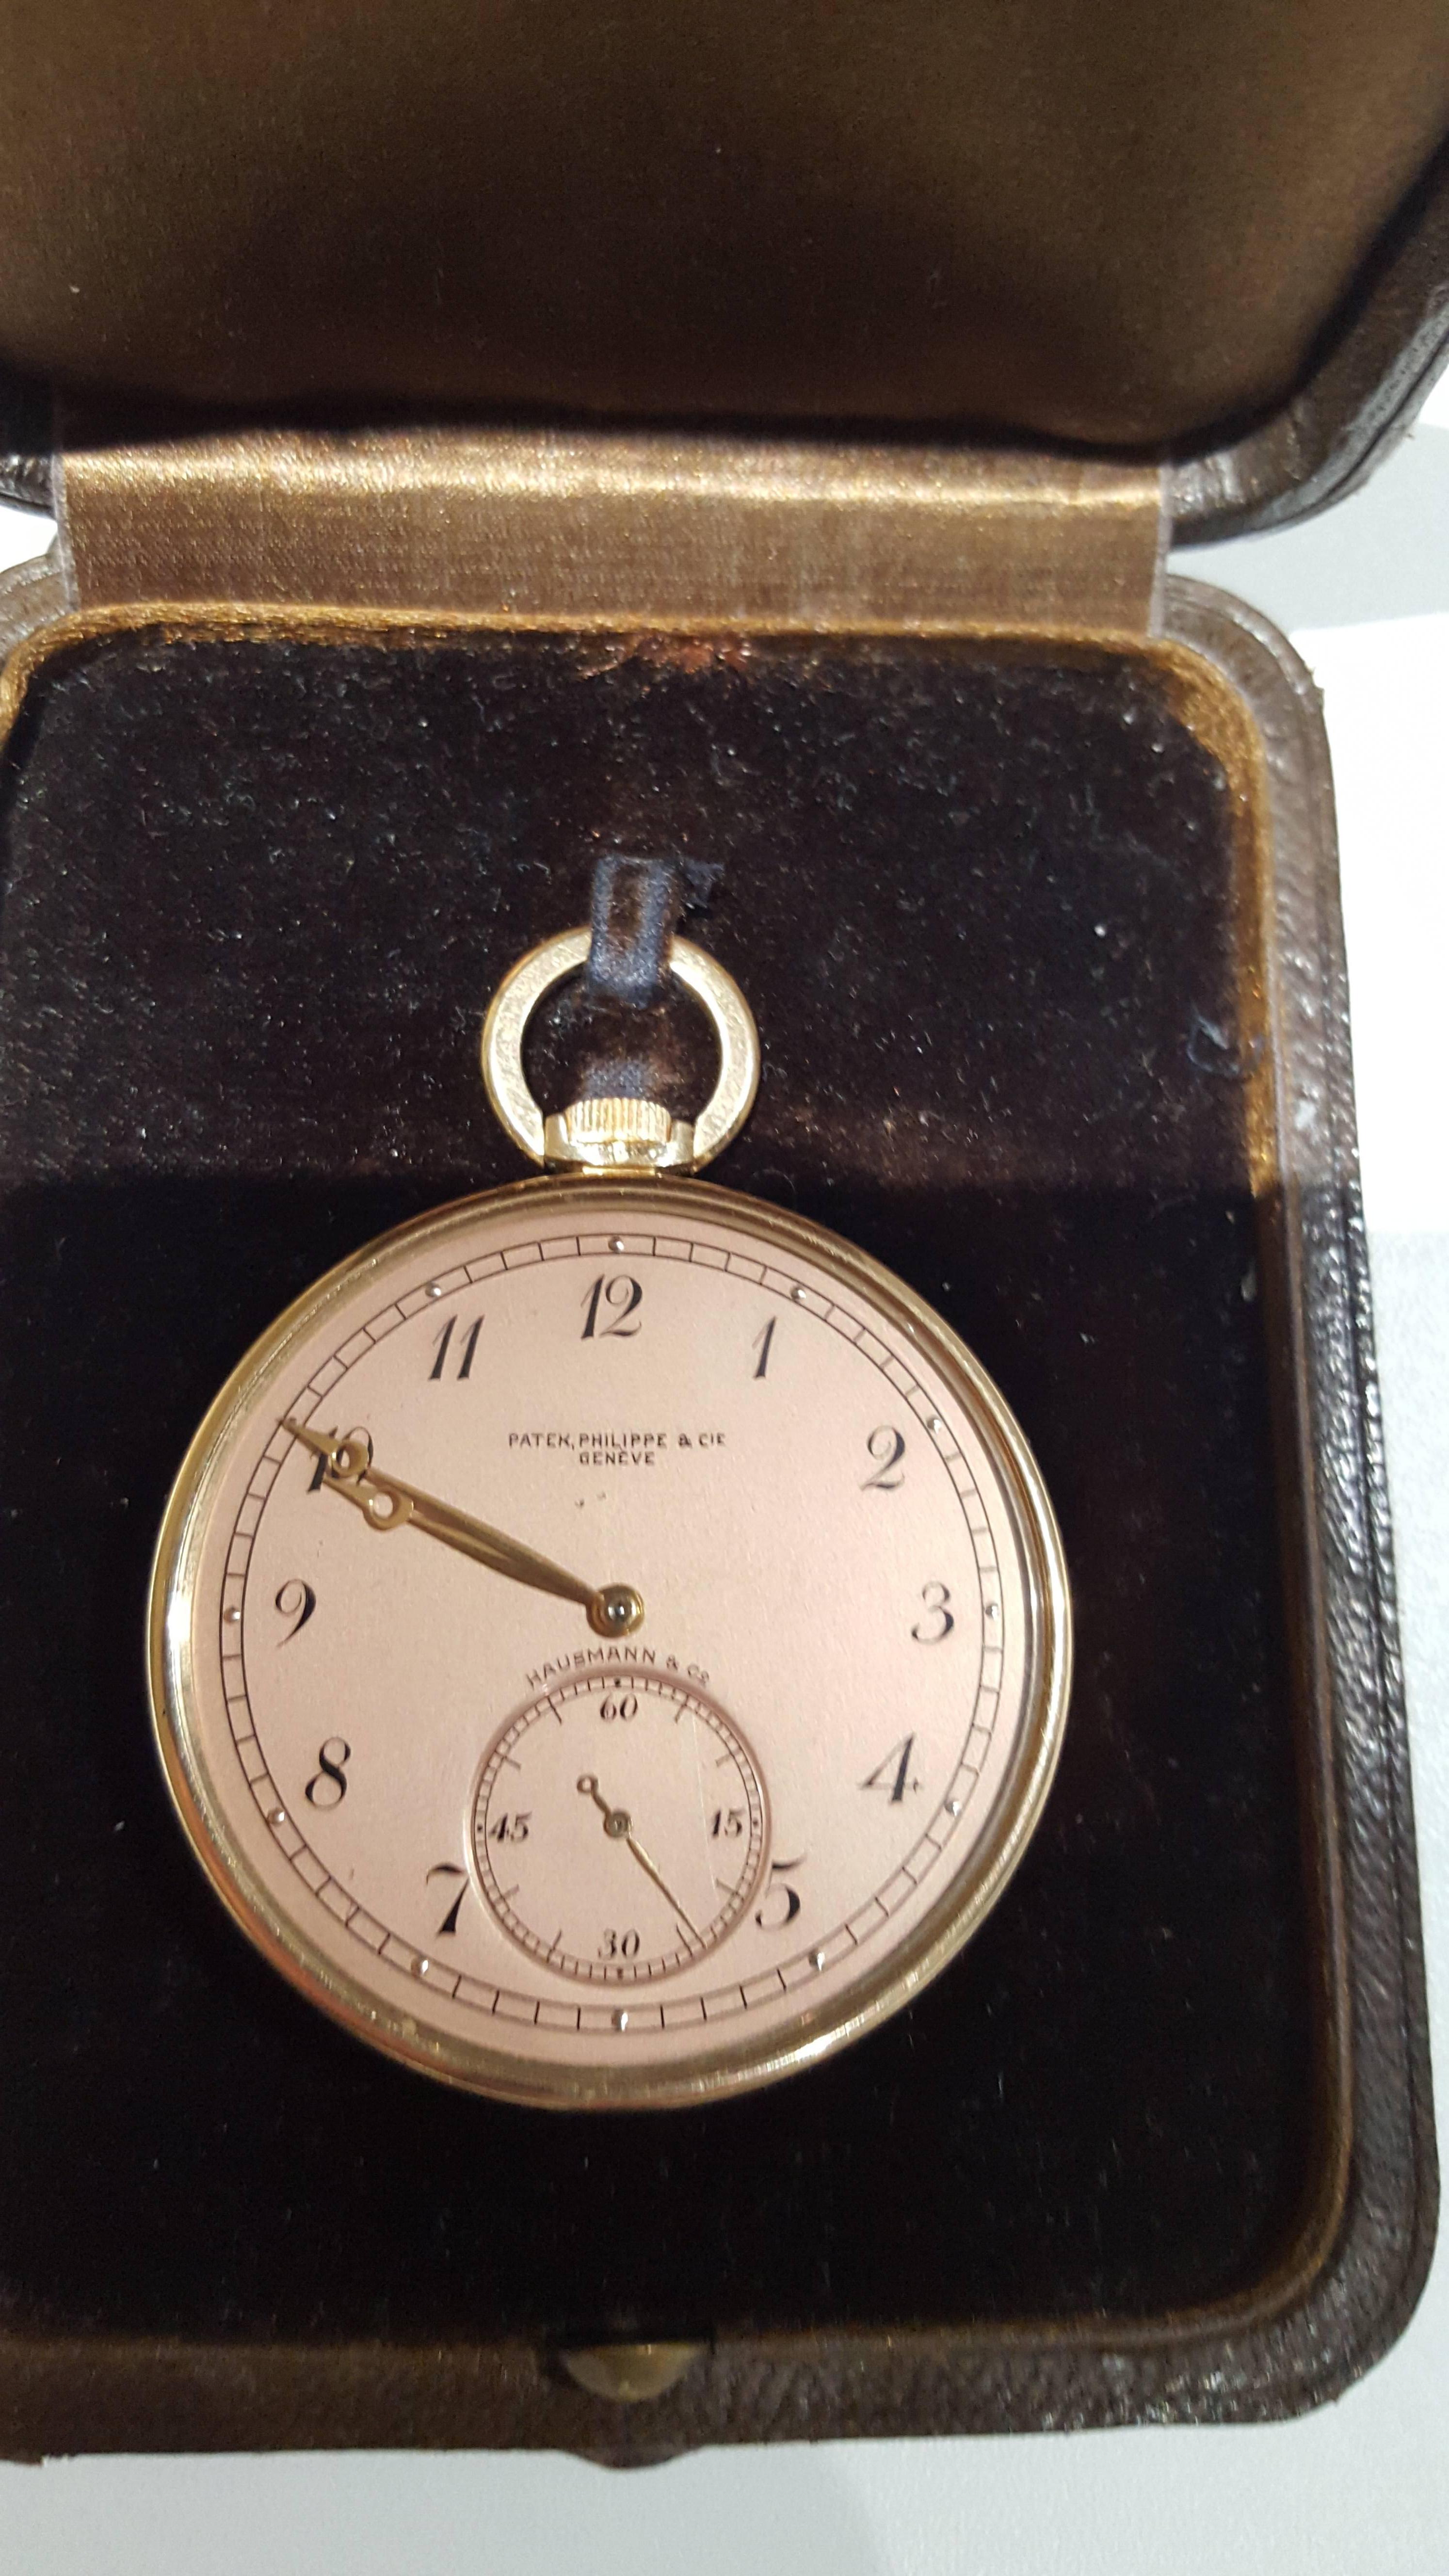 Patek Philippe pocket watch for Hausmann, 1942, hands Luigi Filippo, roman enamelled numbers, Ref 881222. original leather box.
It could be a piece of history, because in 1942, in Rome, few people could afford to buy from the best watch shop